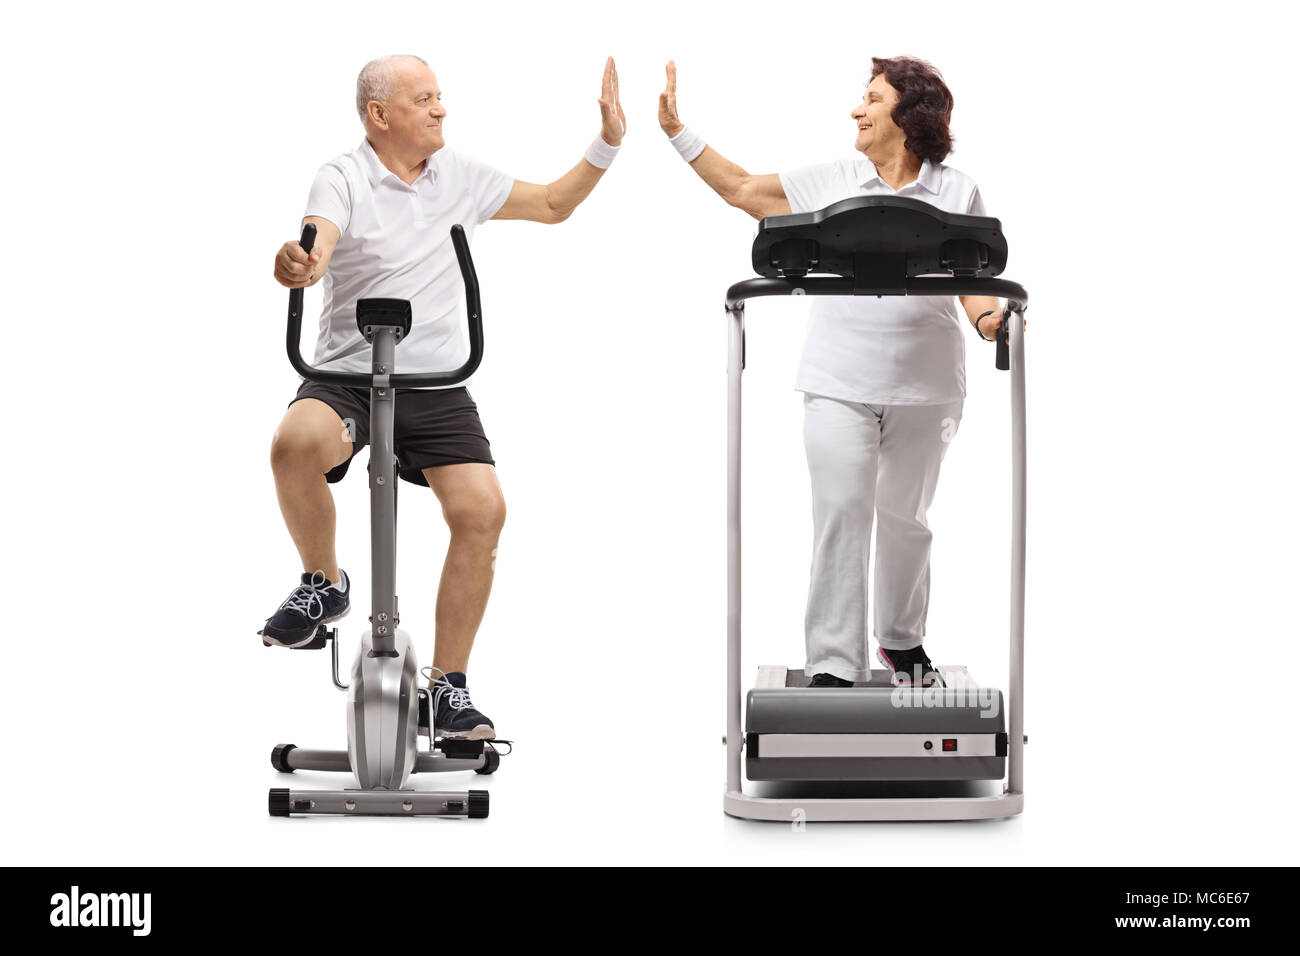 Elderly man exercising on a stationary bike and an elderly woman on a  treadmill high-fiving each other isolated on white background Stock Photo -  Alamy